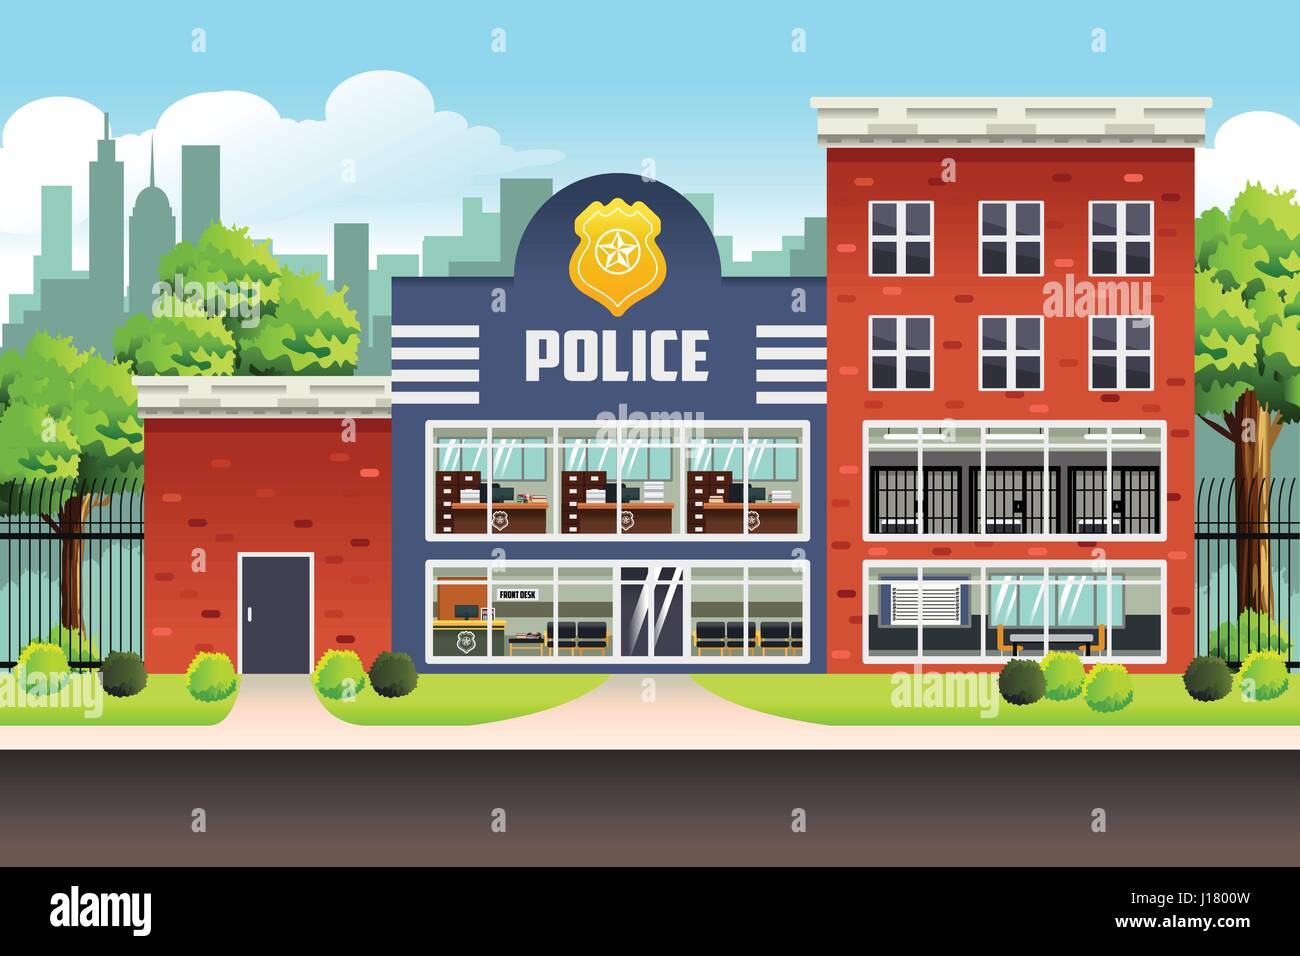 A vector illustration of Police Station Stock Vector